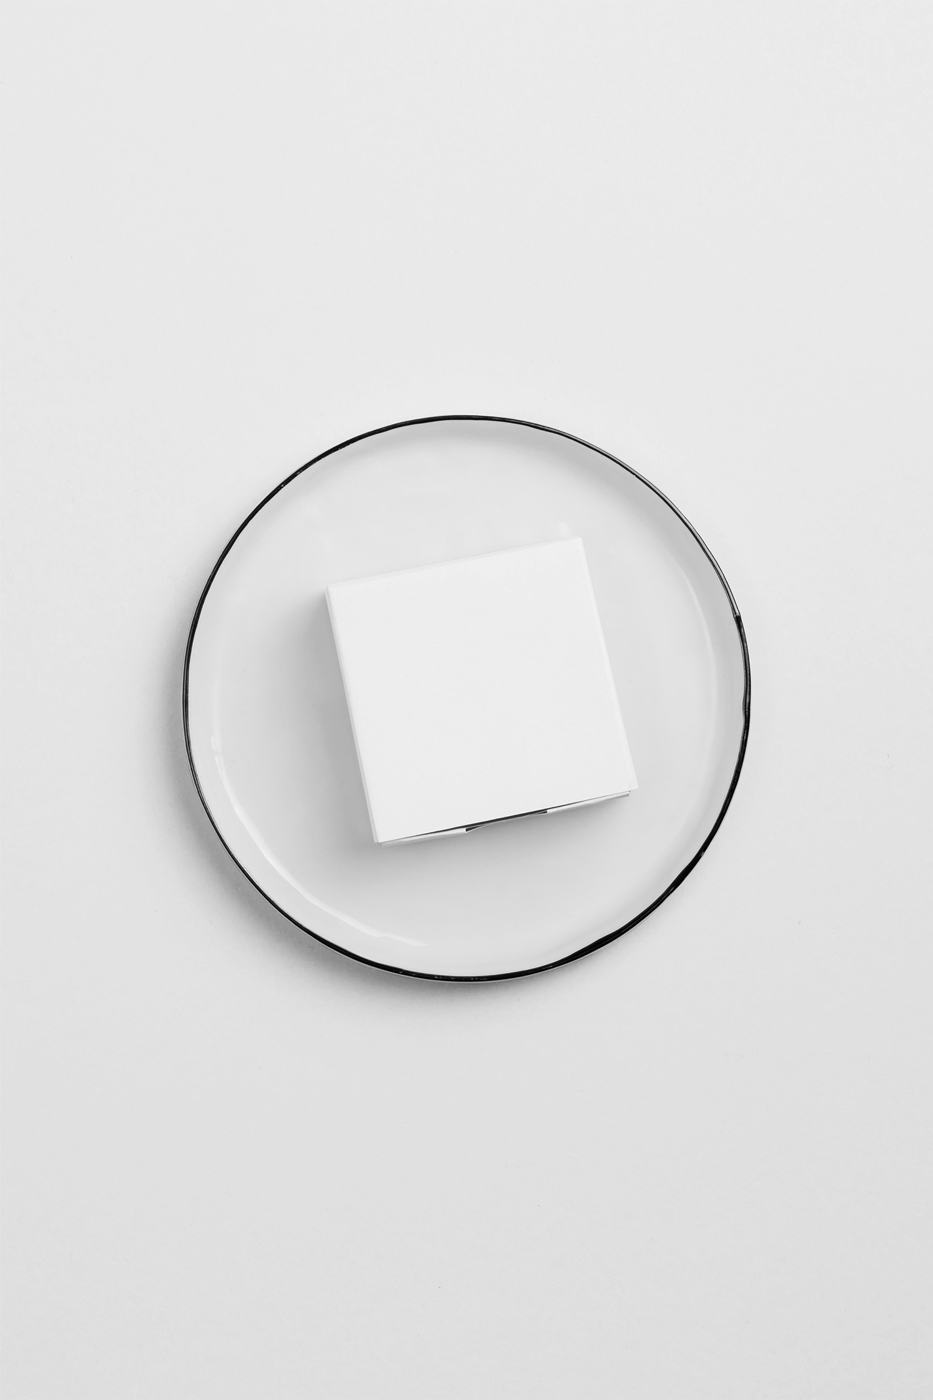 Top View of Small Square Box Mockup FREE PSD